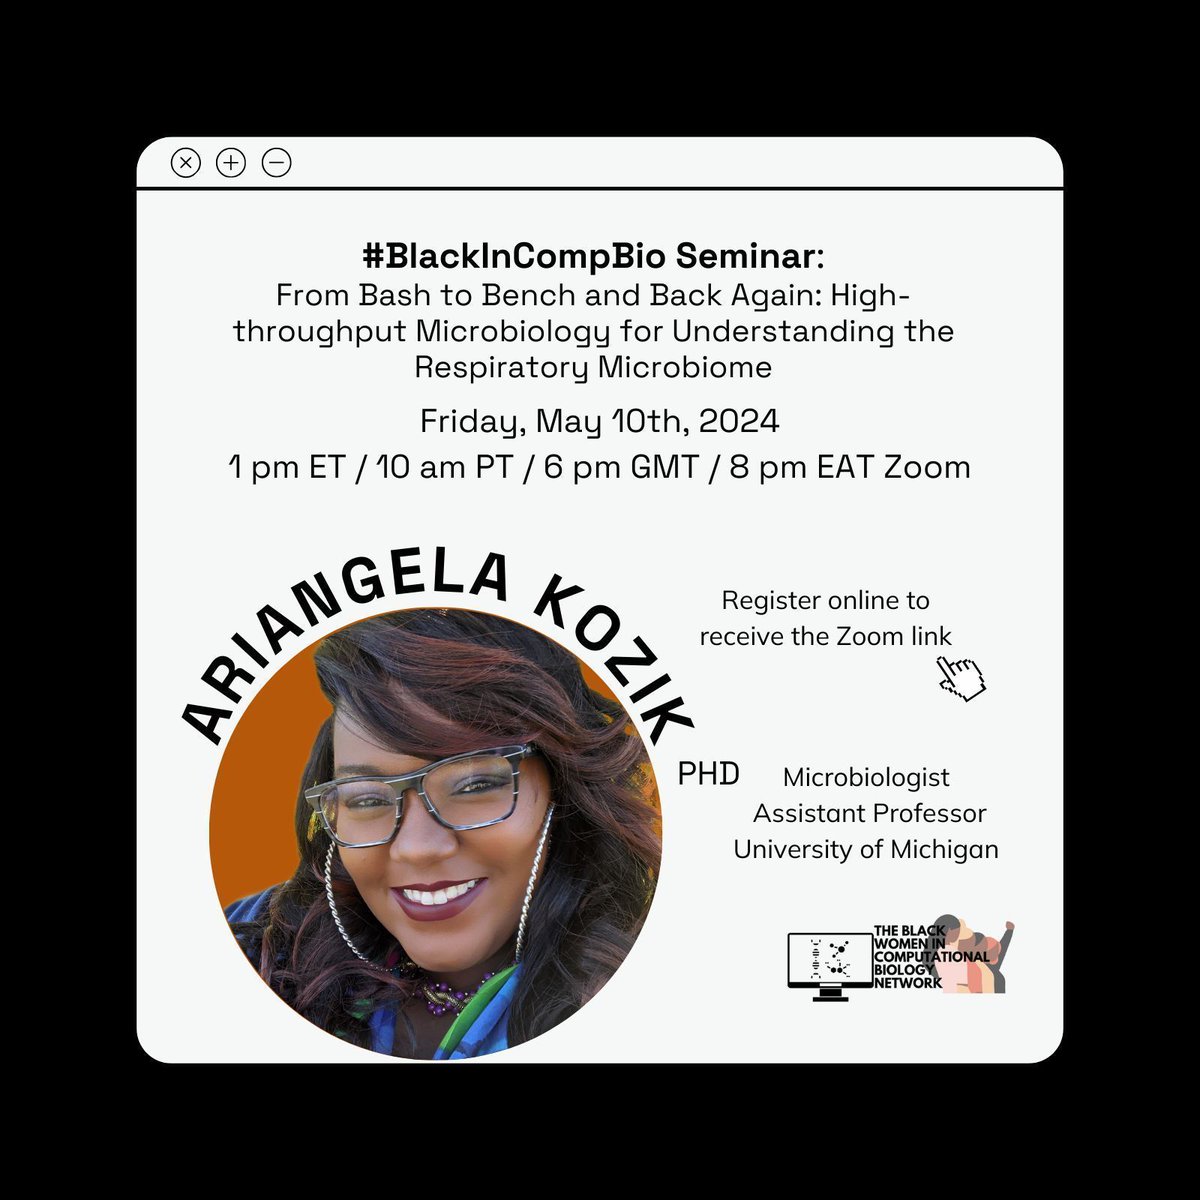 Join us for a #BlackInCompBio Seminar featuring Dr. Ariangela Kozik, Assistant Professor @UMich! 🖥️ Dr. Kozik's research focuses on multi-omics, microbe crosstalk, and chronic respiratory disease. 📆 May 10th @ 1 pm ET / 10 am PT / 6 pm GMT / 8 pm EAT RSVP buff.ly/4d0VH18